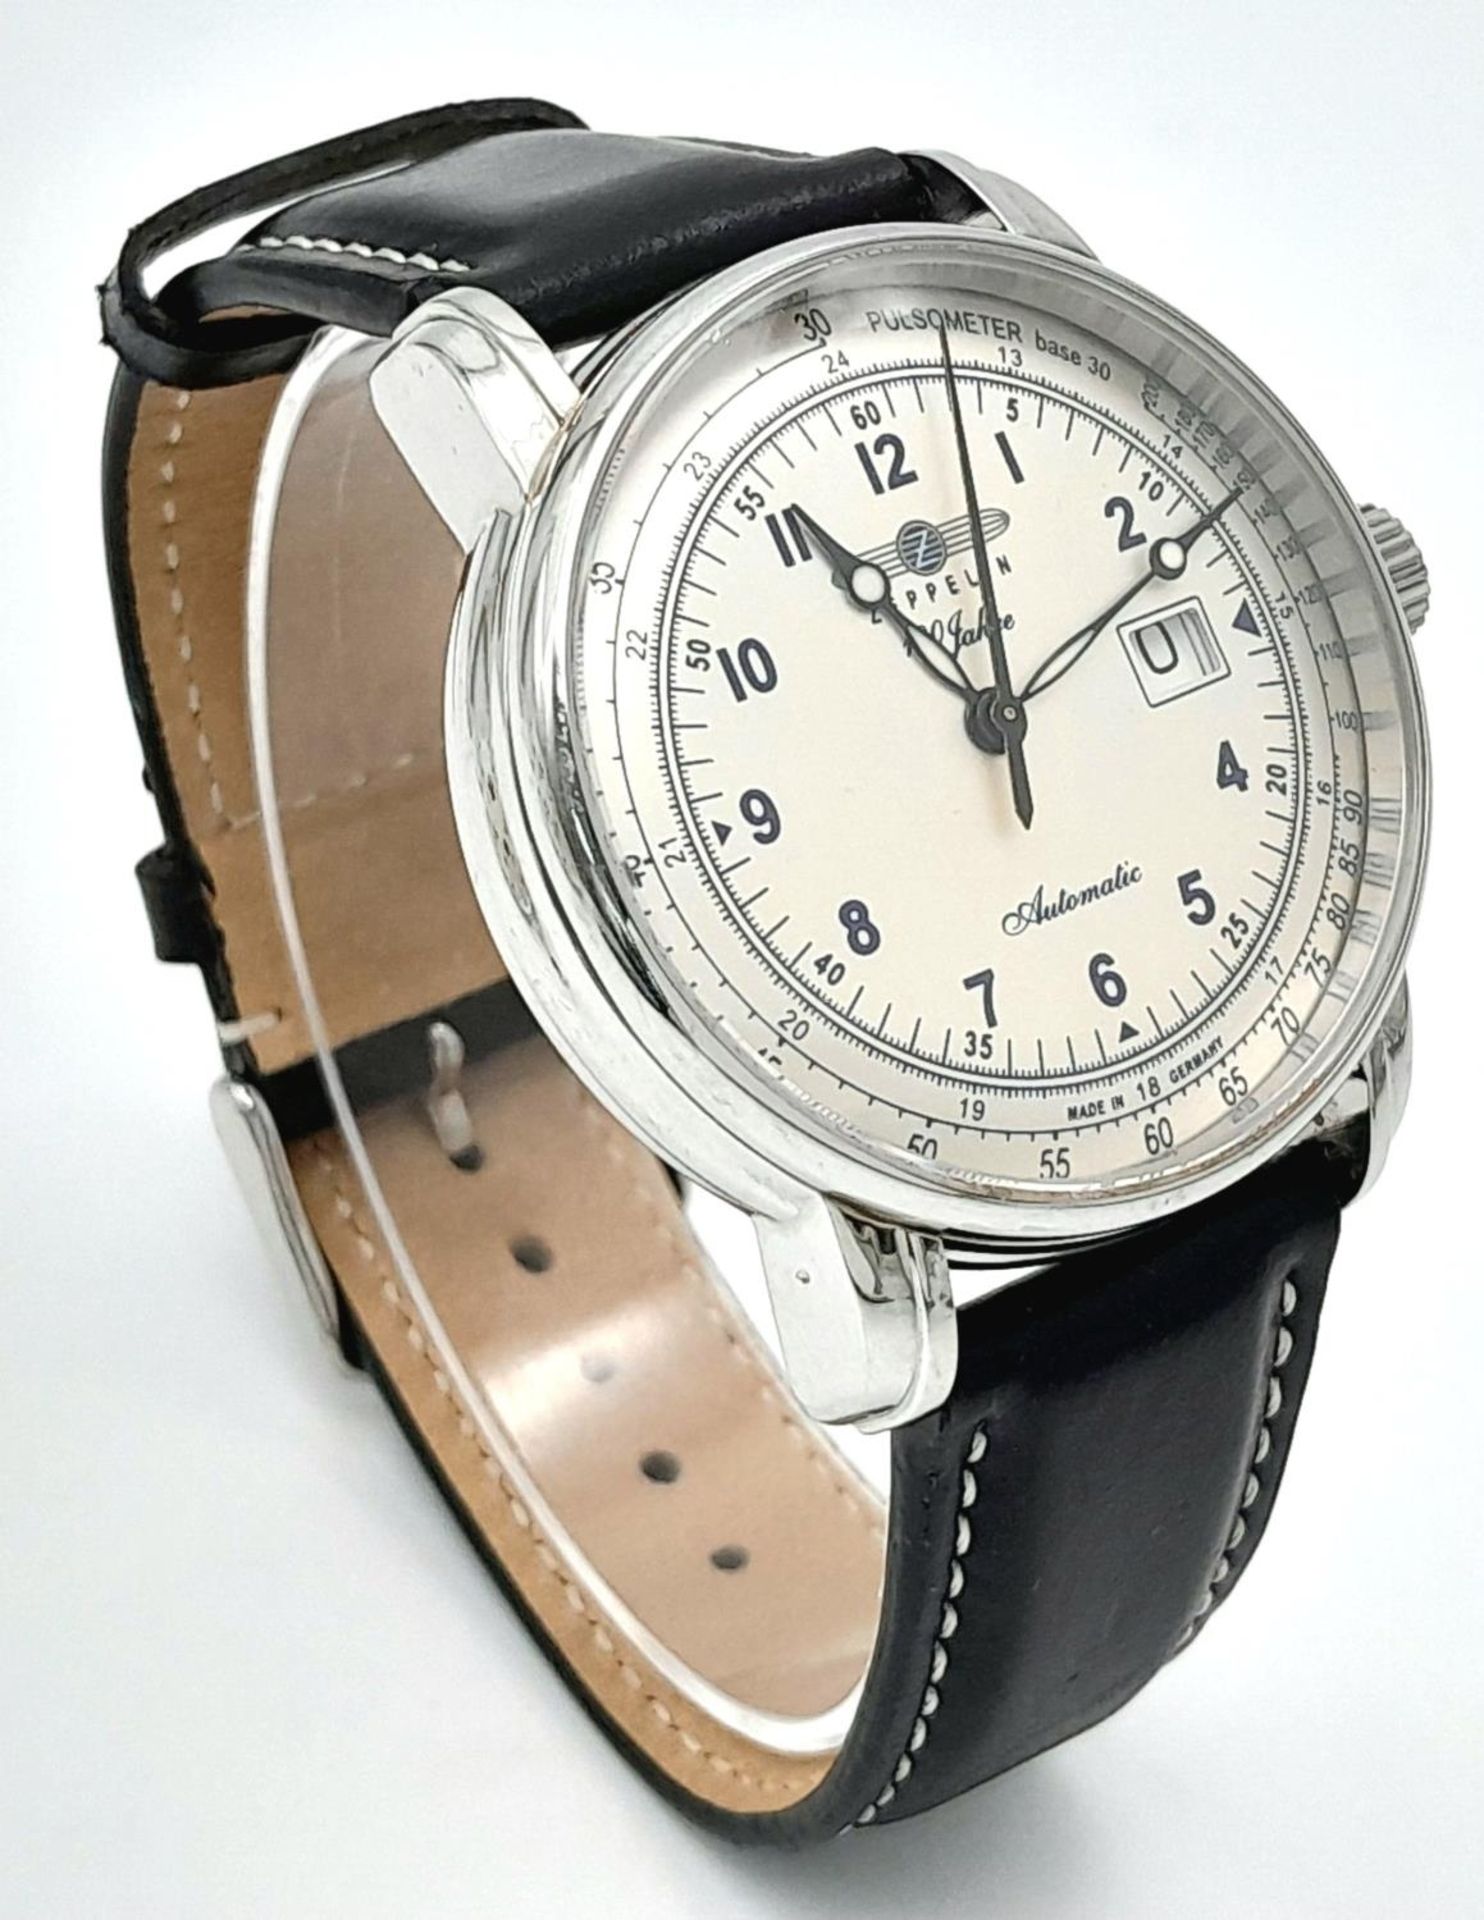 A Zeppelin Automatic Gents Watch. Black leather strap. Stainless steel case - 42mm. White dial - Image 3 of 6